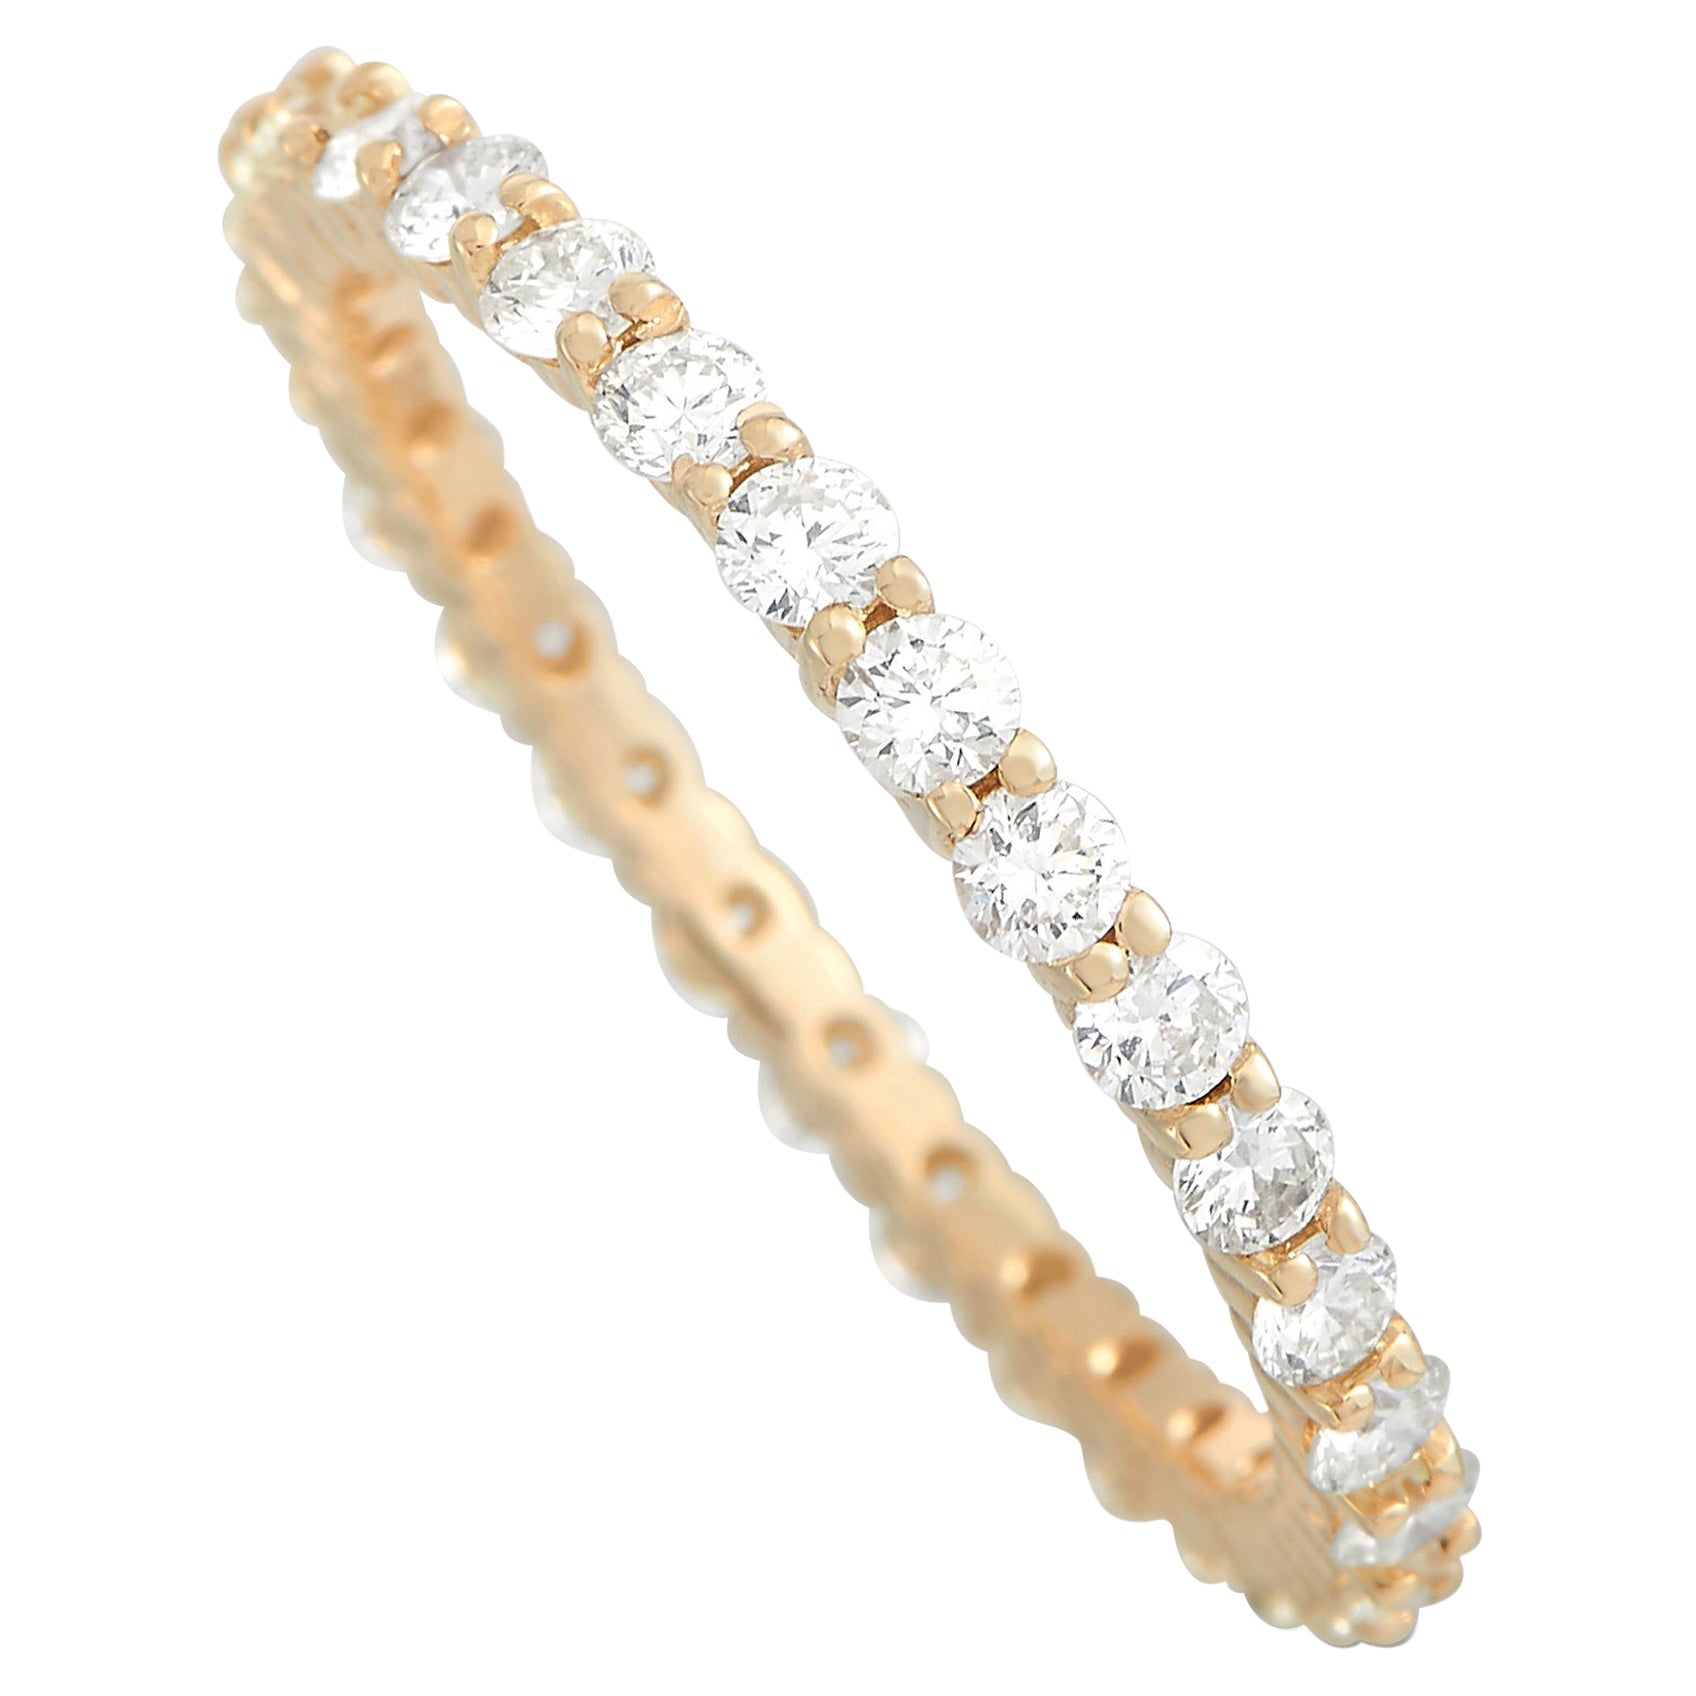 LB Exclusive 14K Yellow Gold 1.00 Ct Diamond Eternity Band Ring